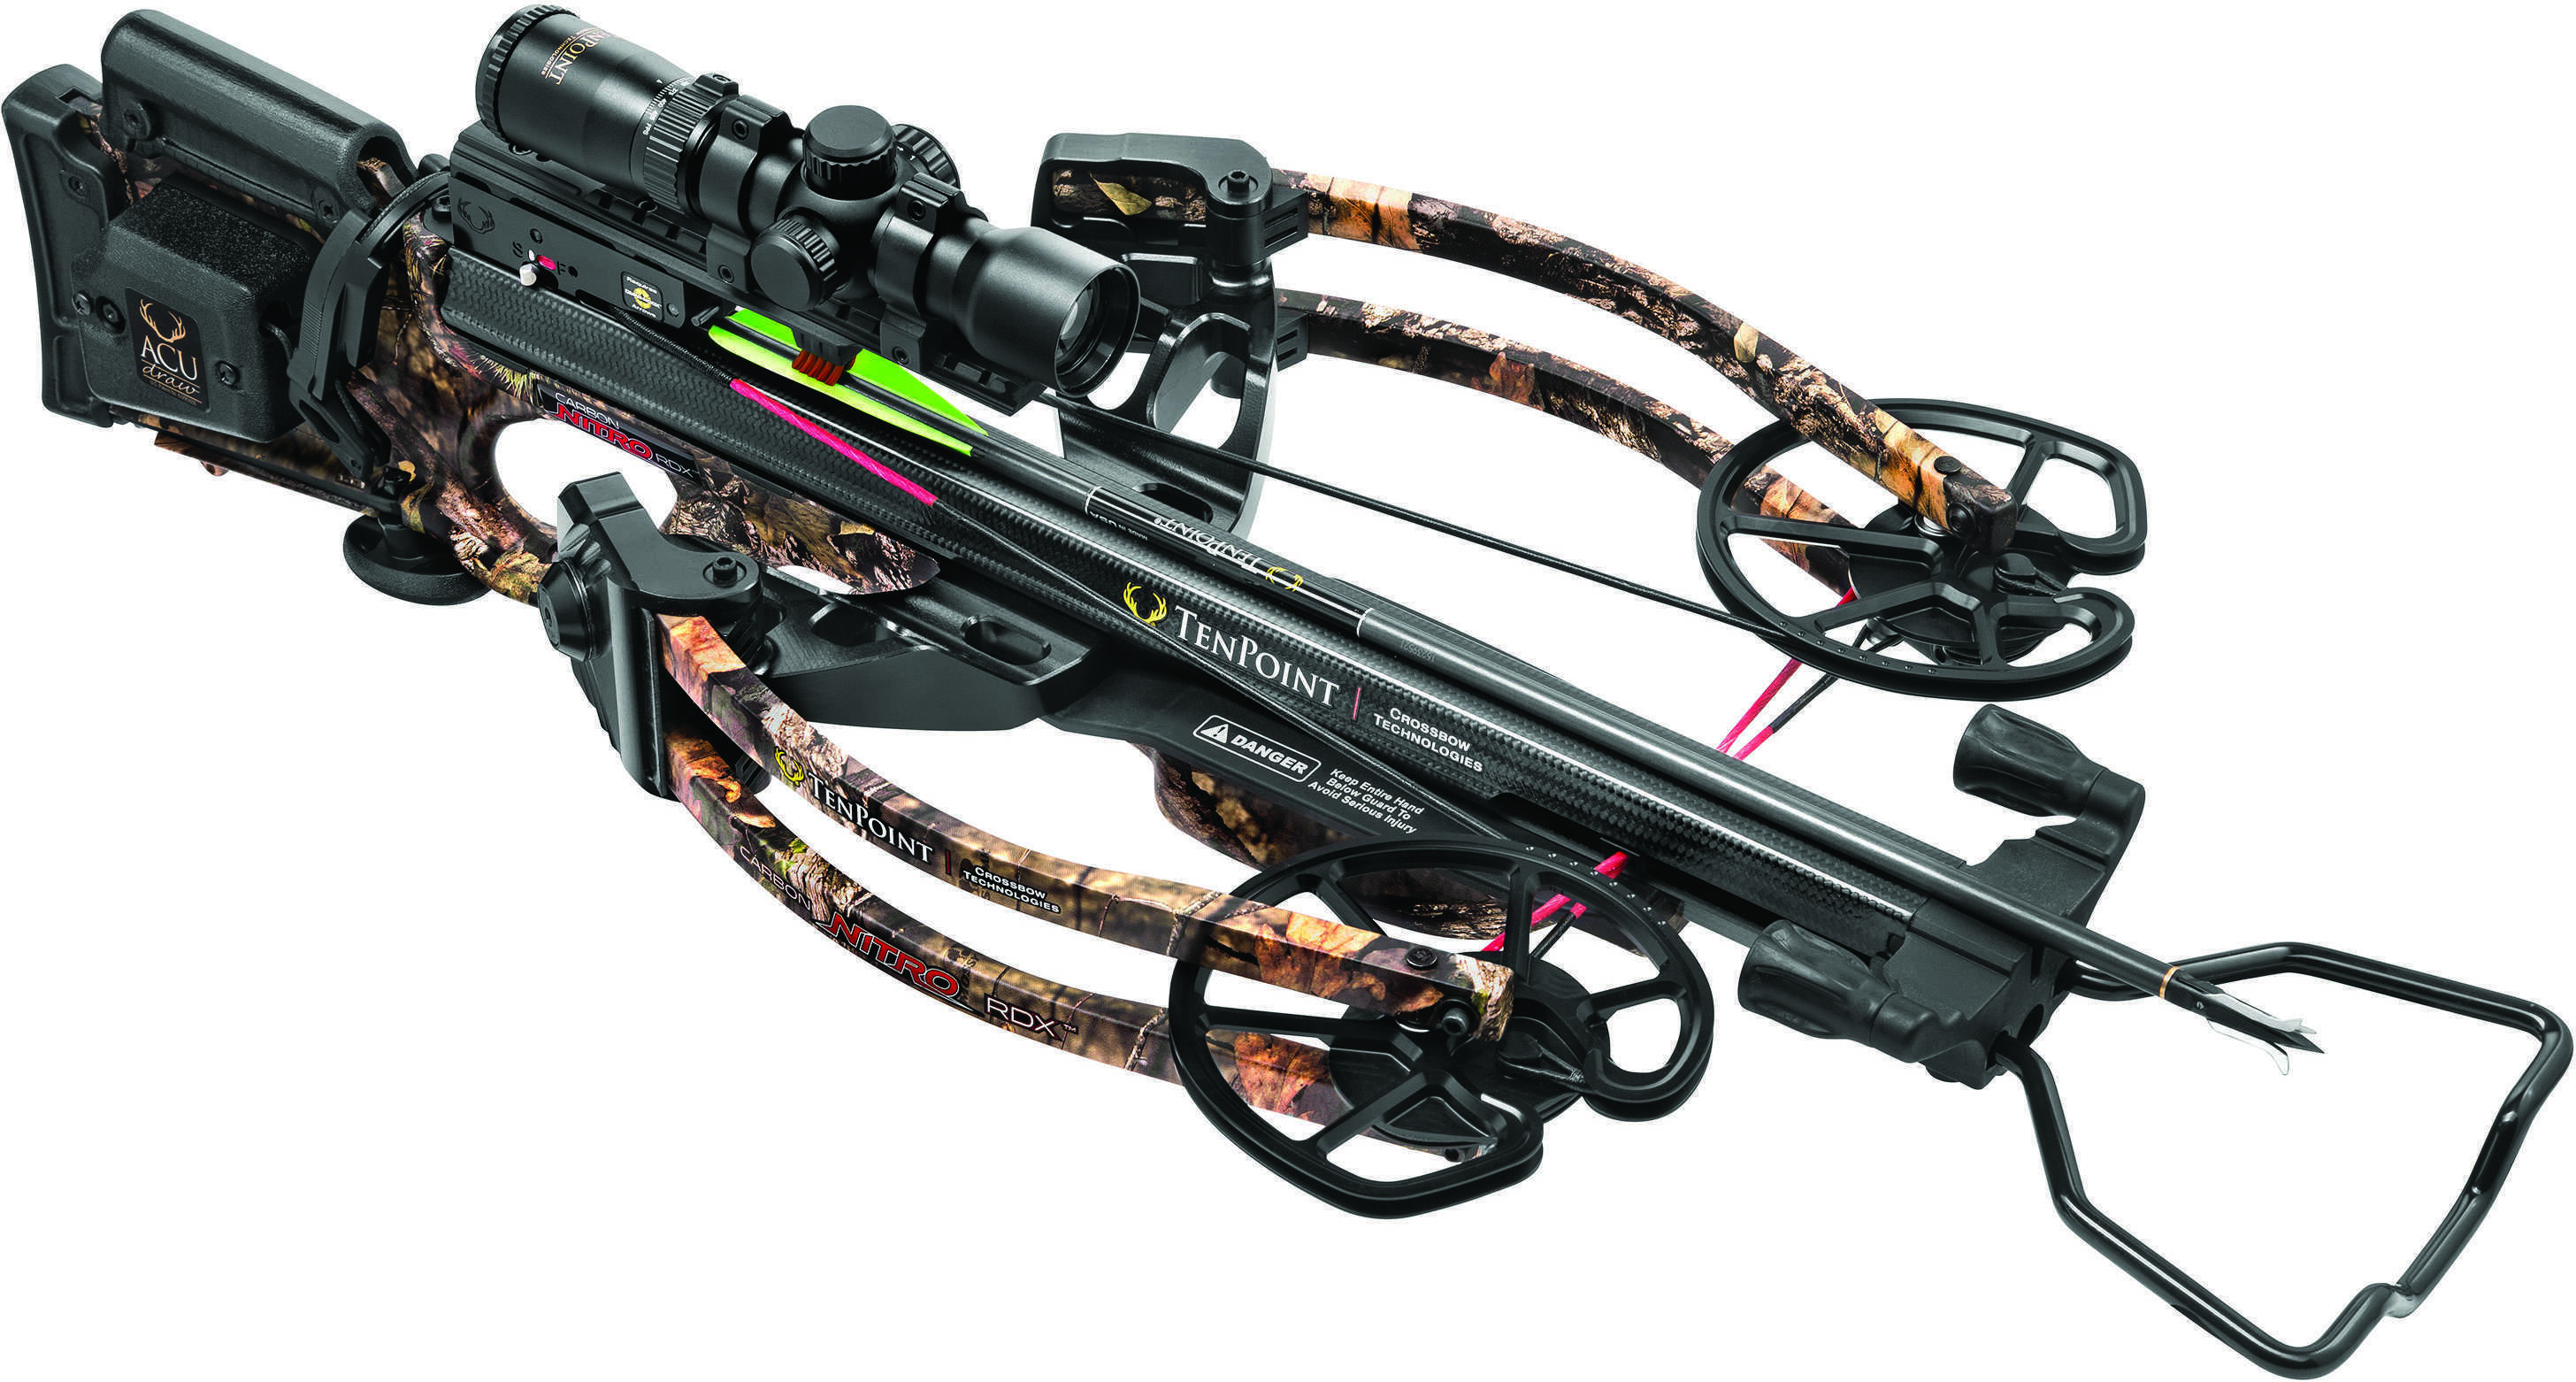 TenPoint Carbon Nitro RDX Crossbow AcuDraw Package Model: CB16005-5412